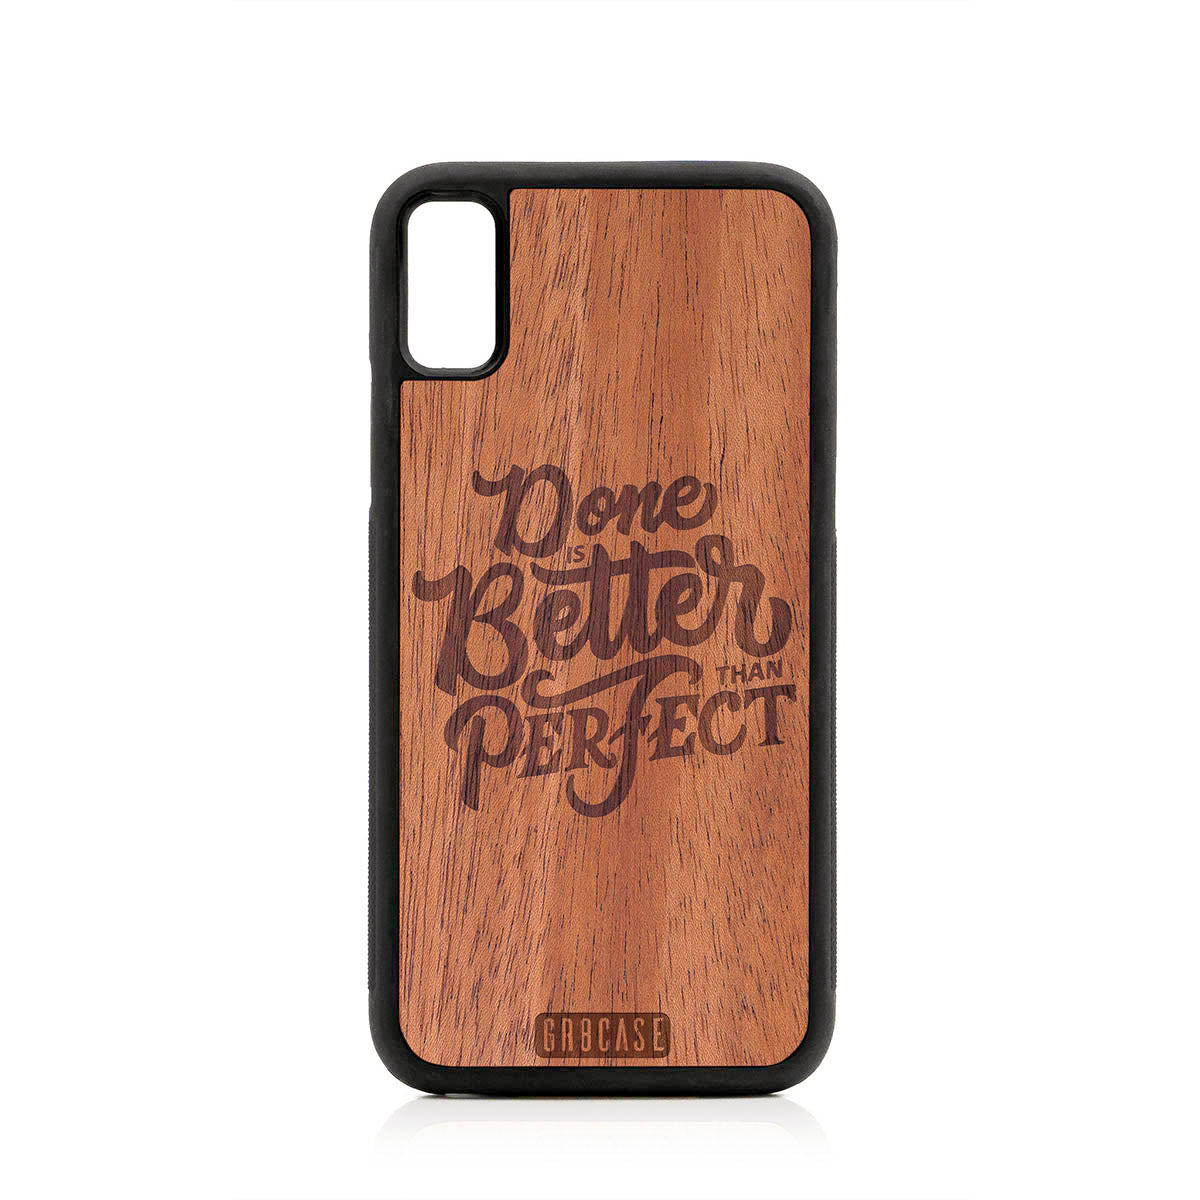 Done Is Better Than Perfect Design Wood Case For iPhone XS Max by GR8CASE